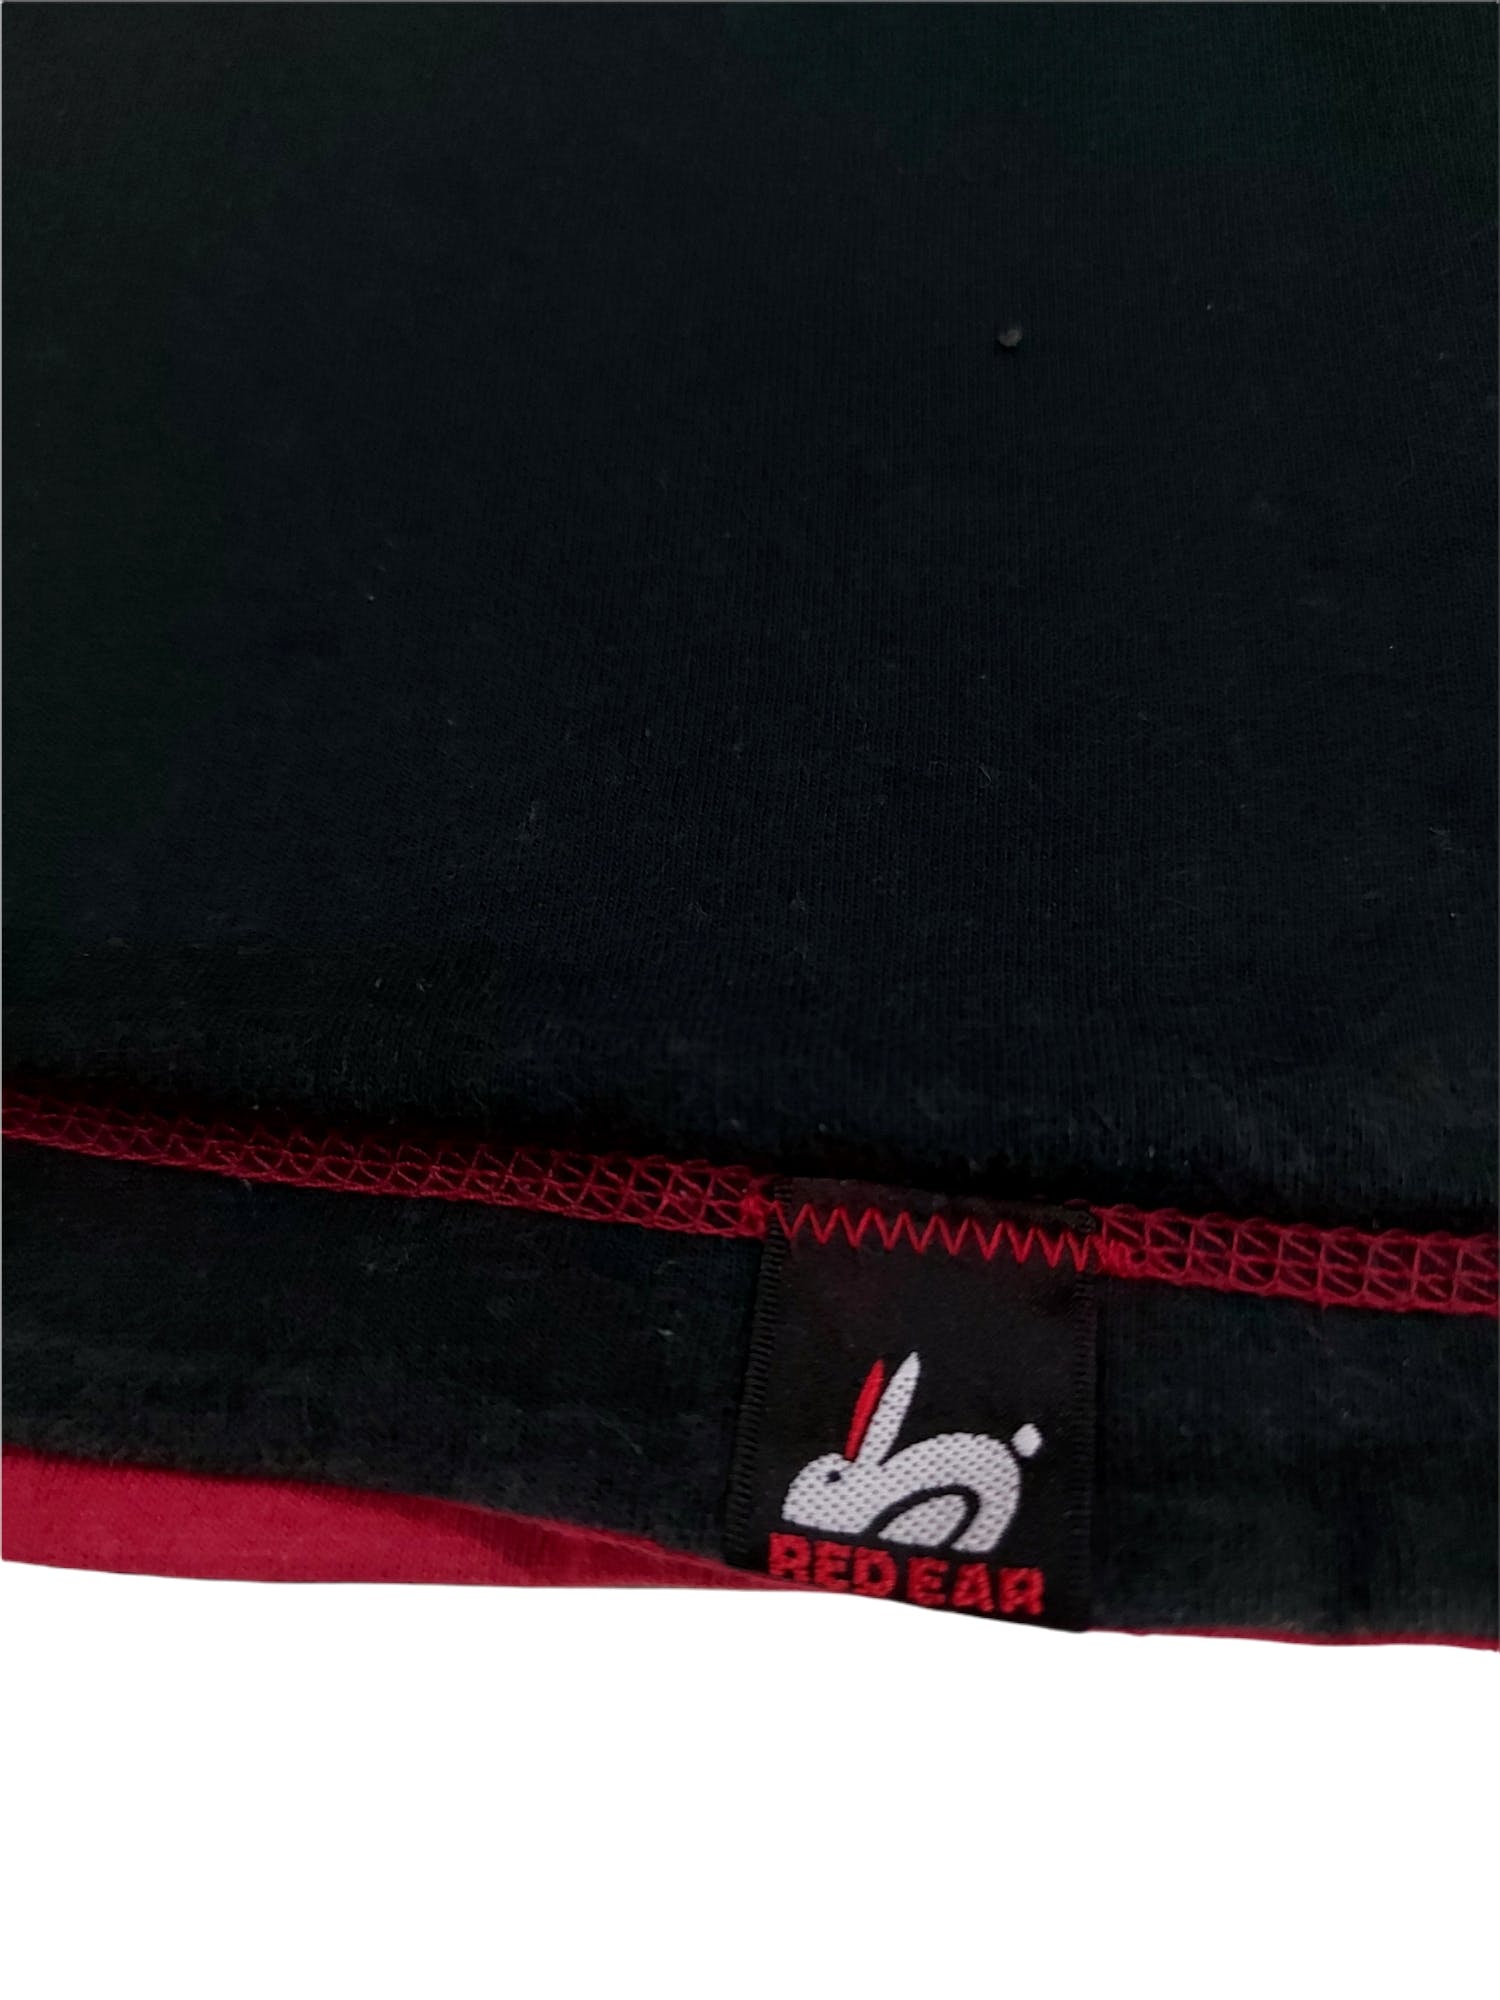 RARE! VTG PAUL SMITH RED EAR REVERSIBLE EMBROIDERED LOGO - 10